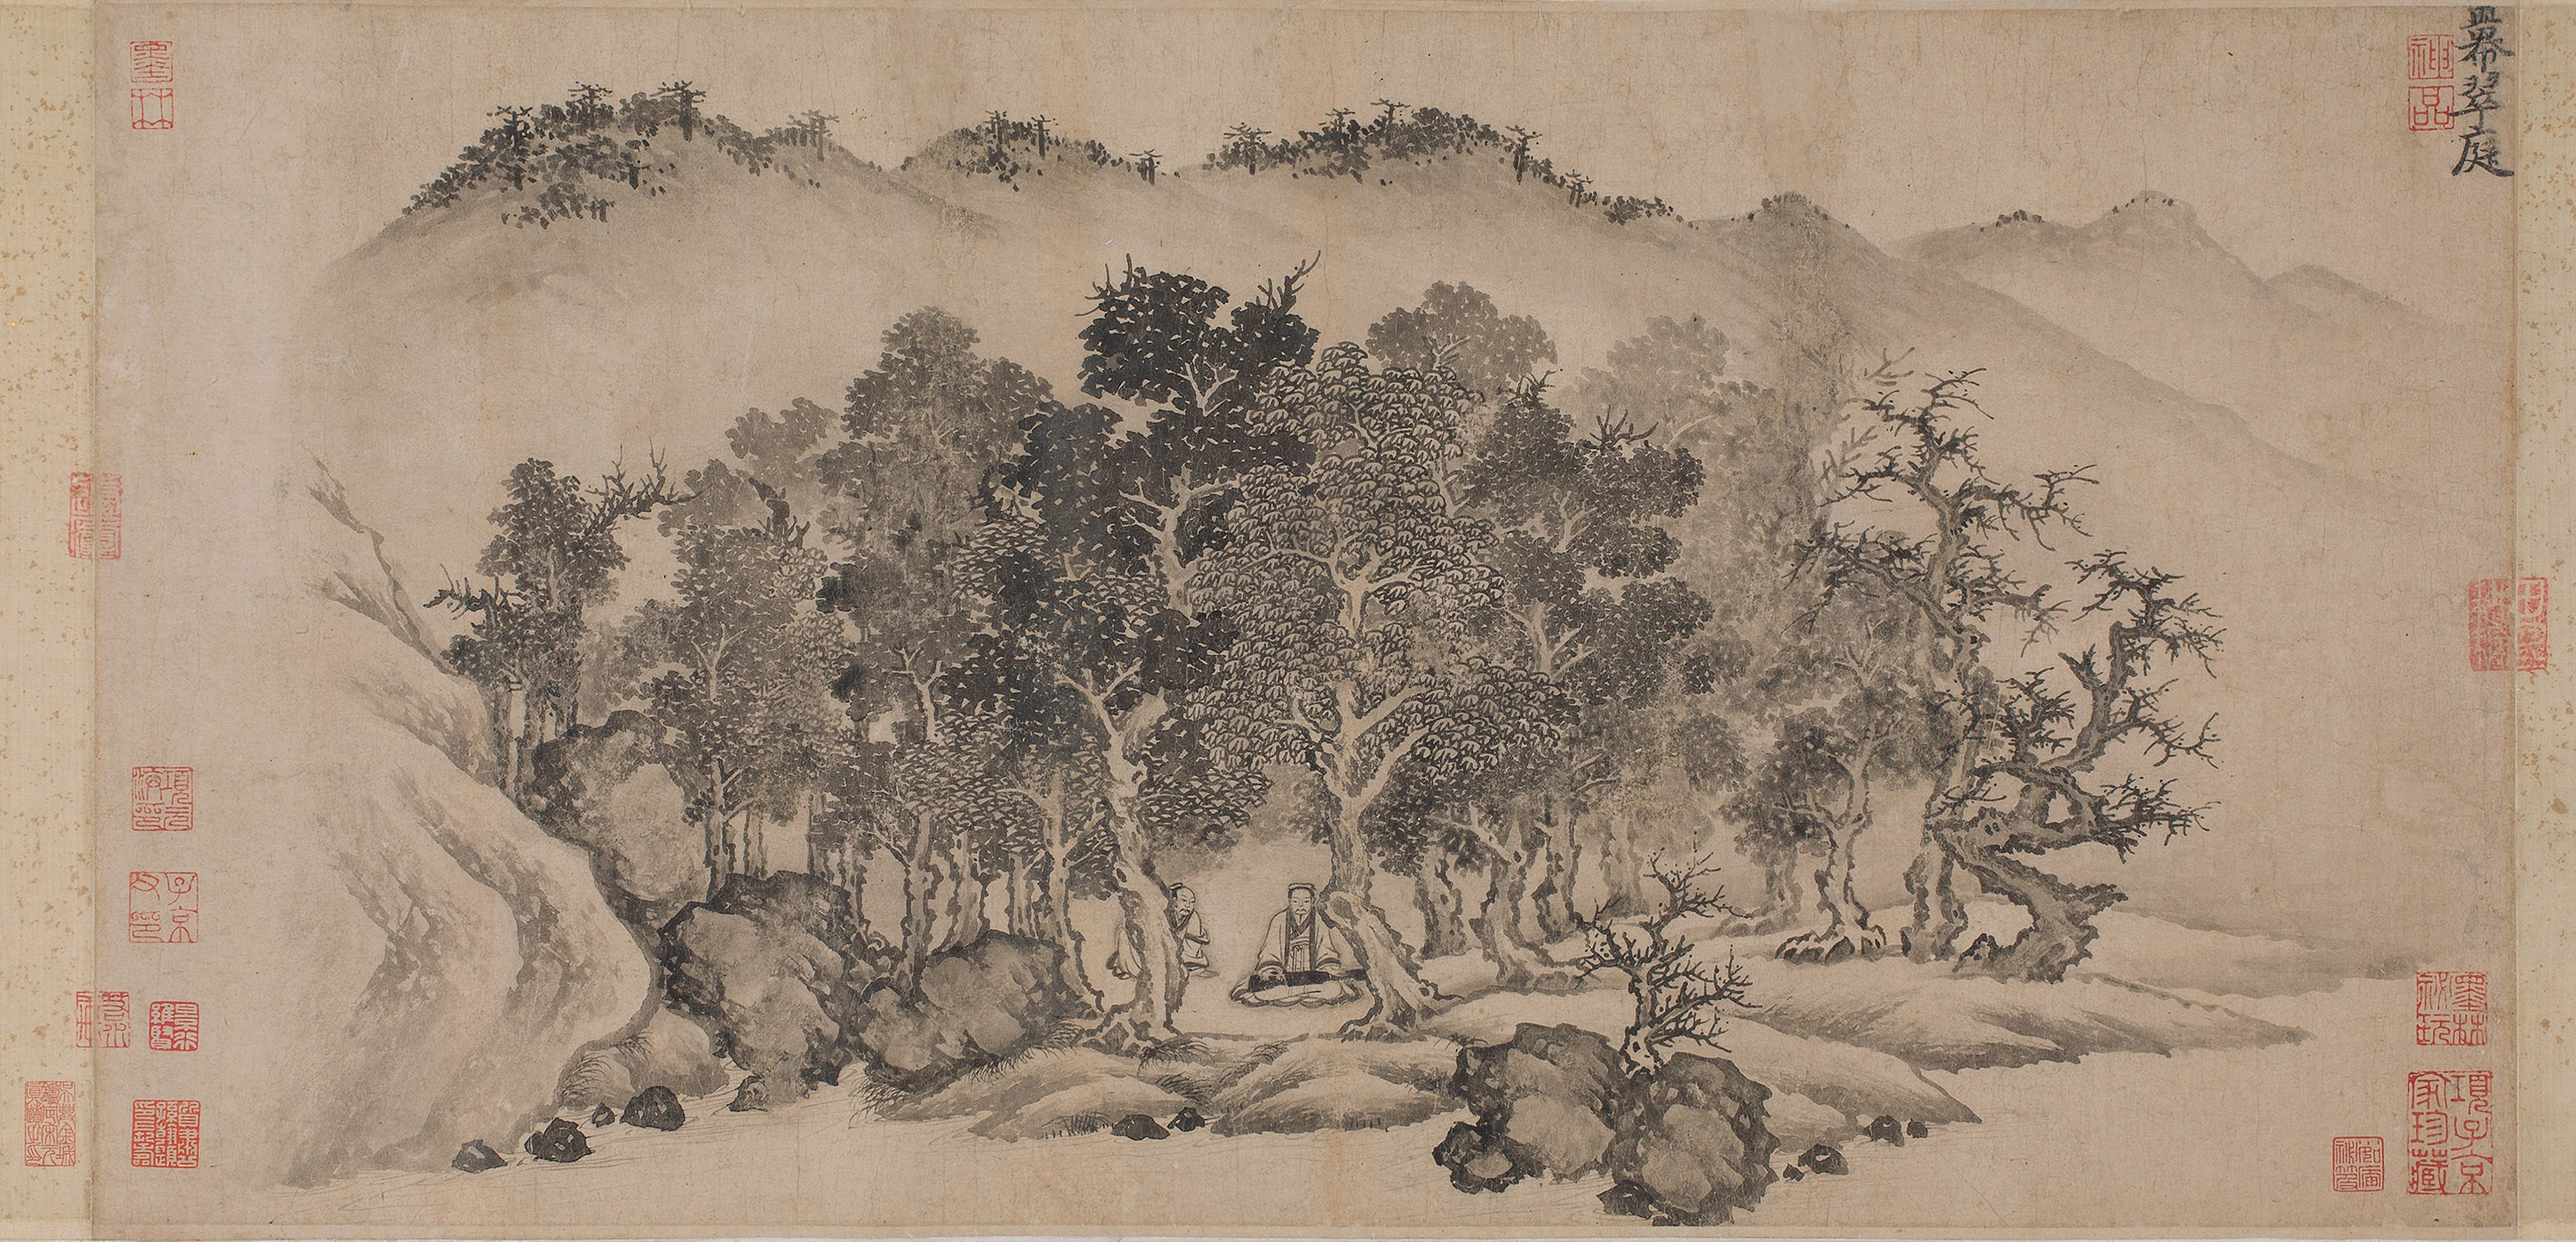 China Painting Chinese Culture 5382x2595